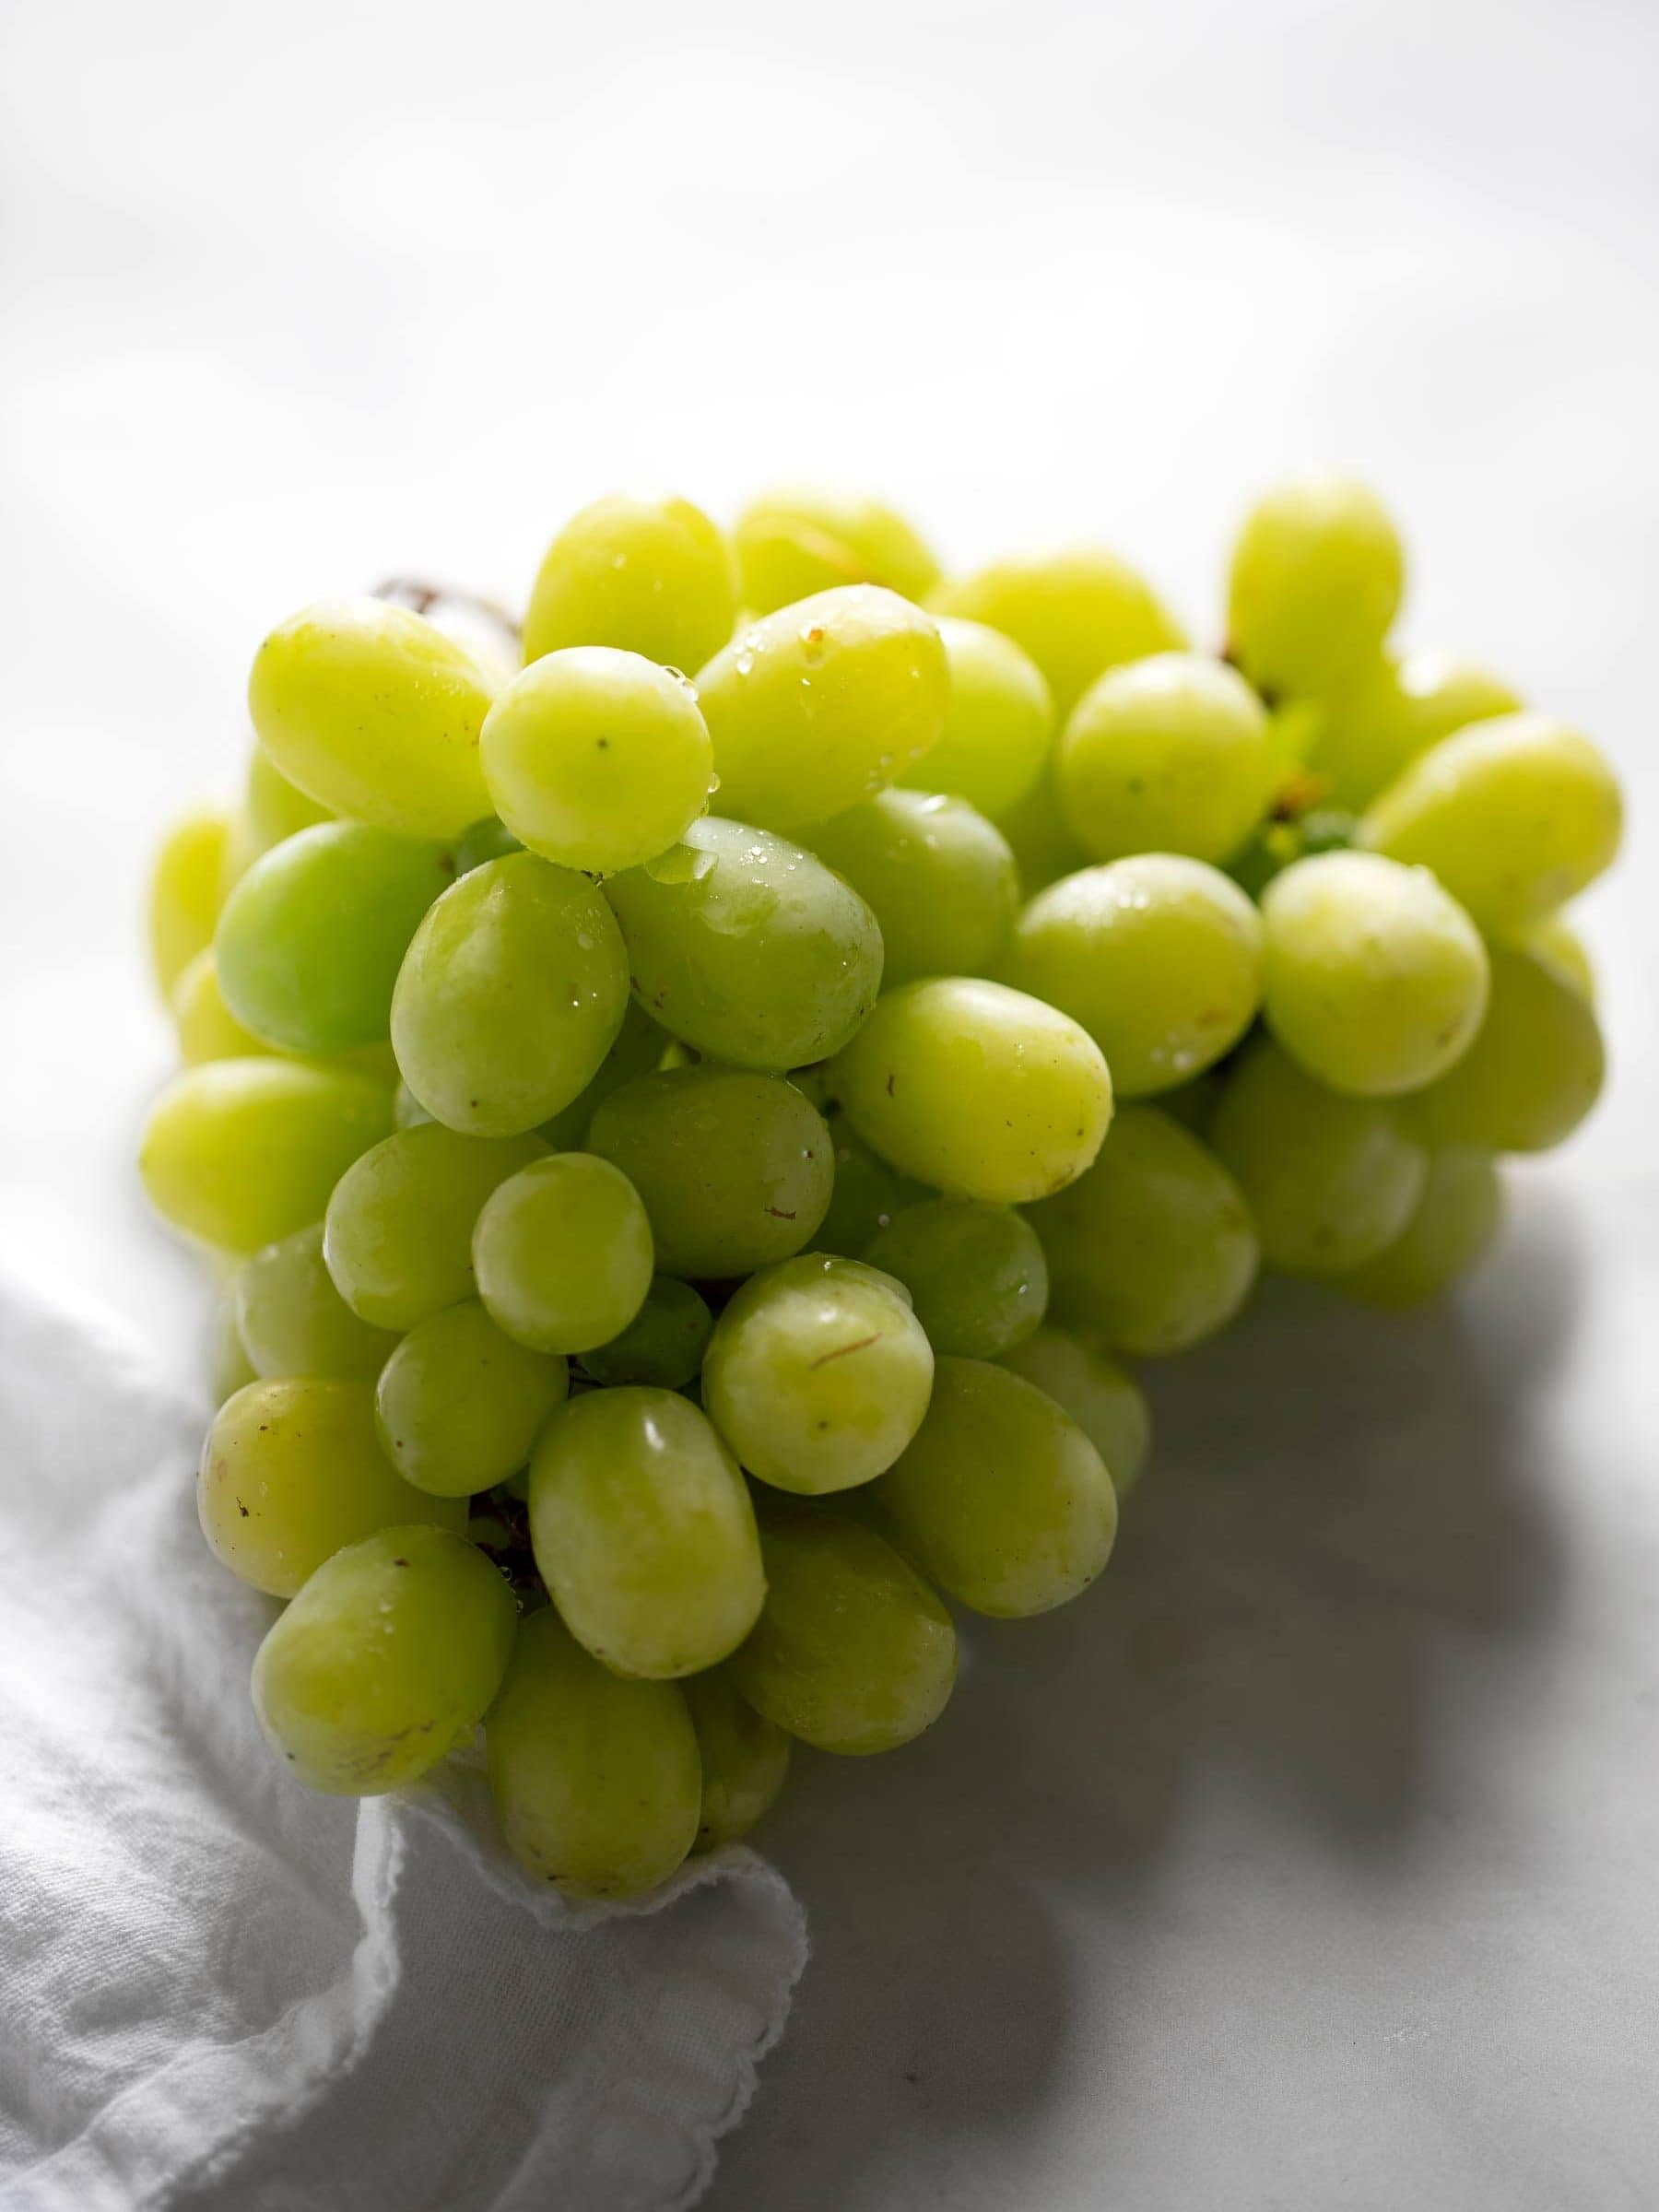 Green Seedless Grapes at Whole Foods Market